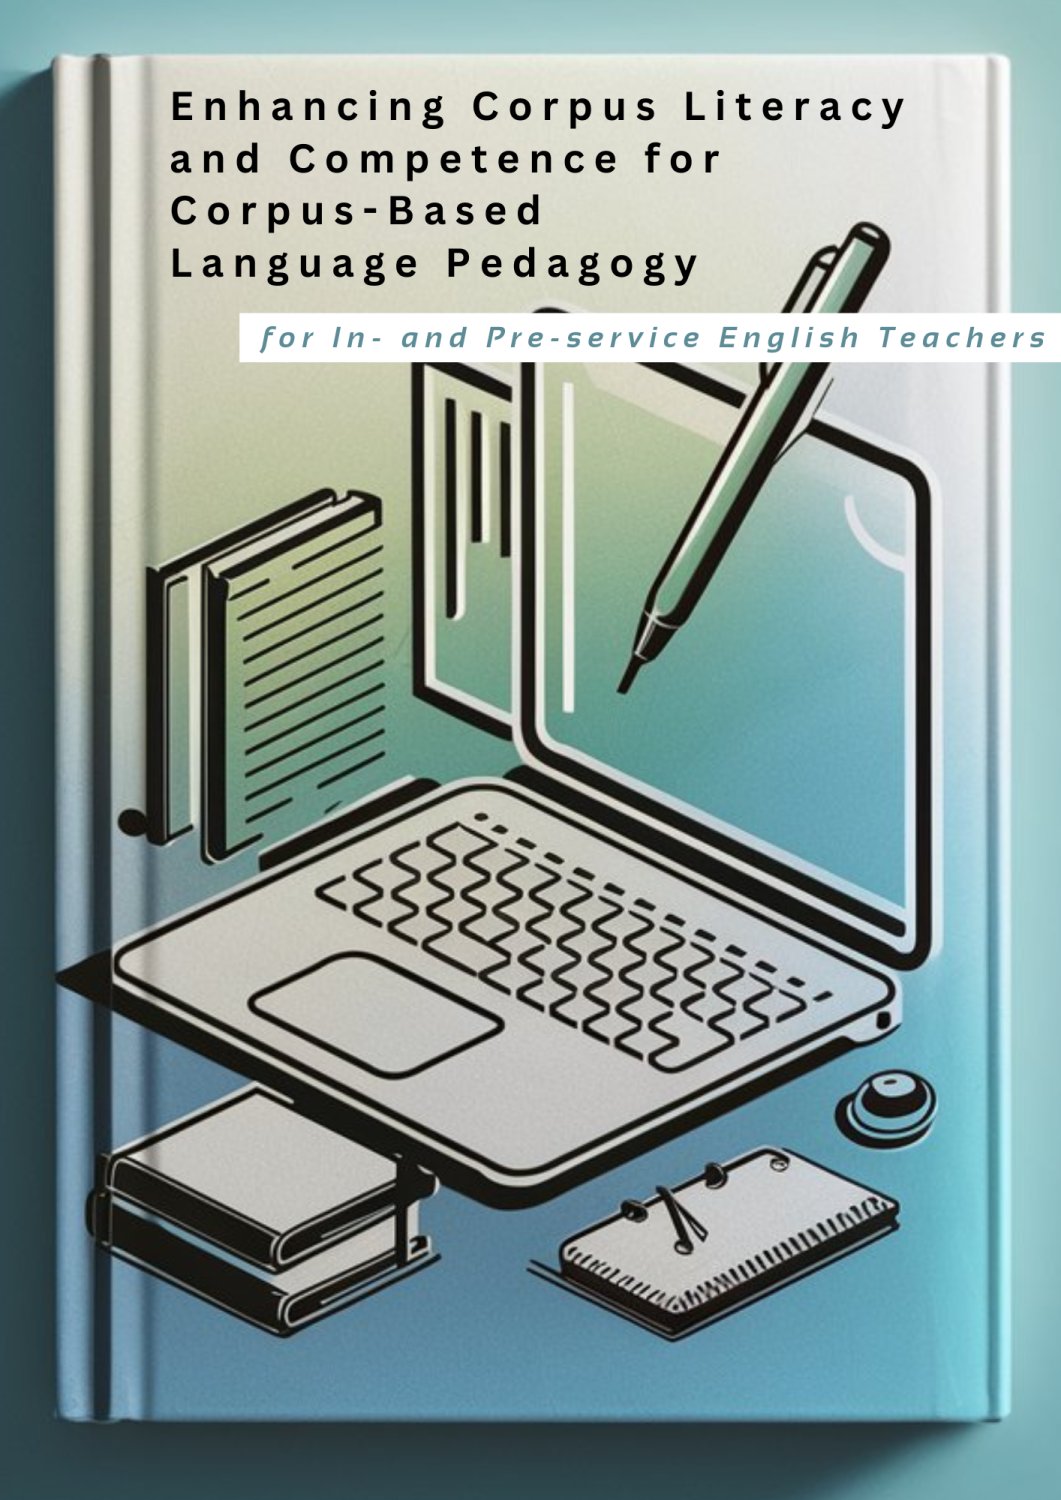 Cover image for Enhancing Corpus Literacy and Competence for Corpus-Based Language Pedagogy for In- and Pre-service English Teachers